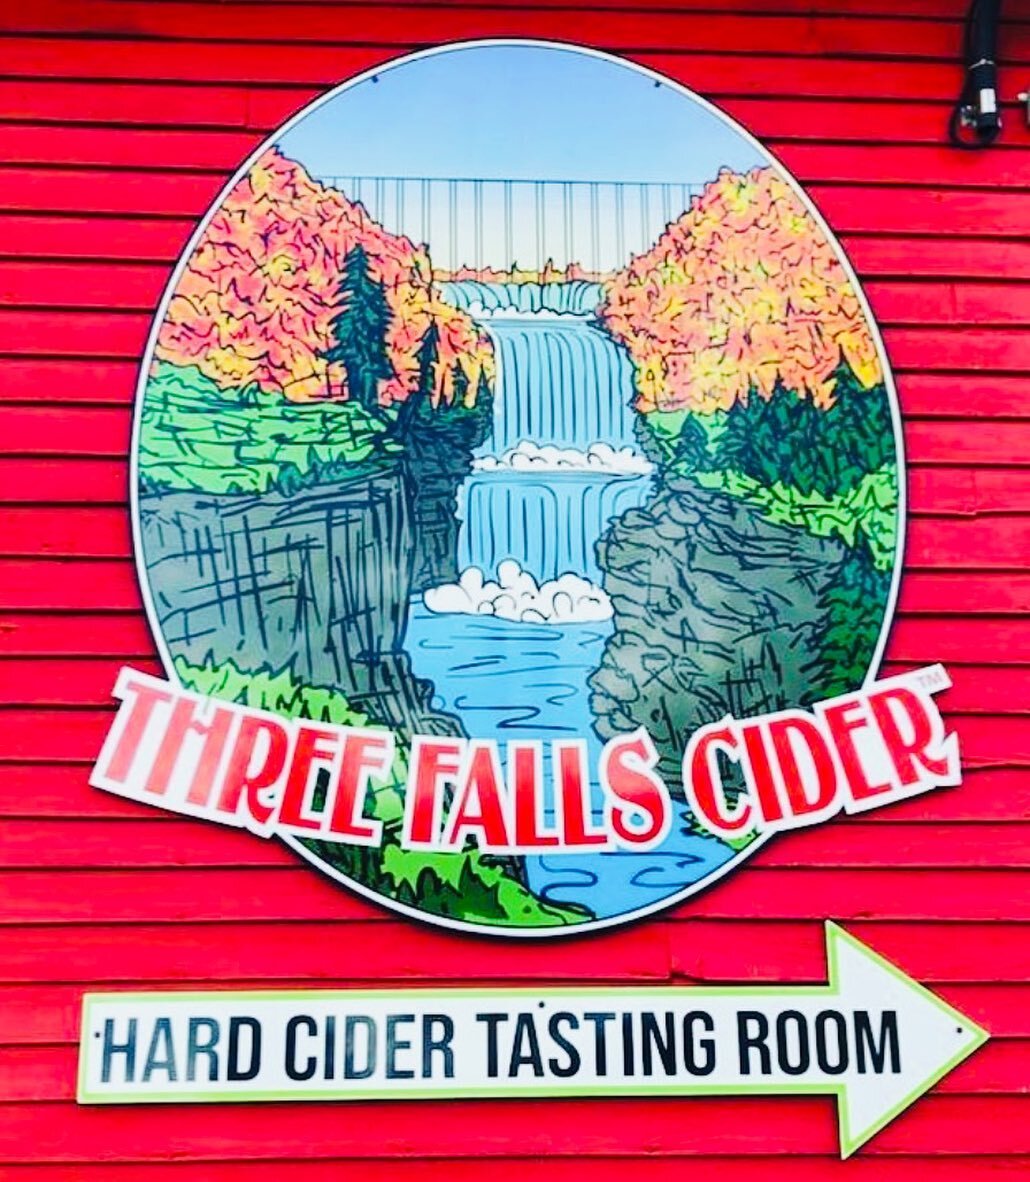 Hard cider coming soon! Stay tuned! 🍎 Follow @threefallscider for updates 🌳